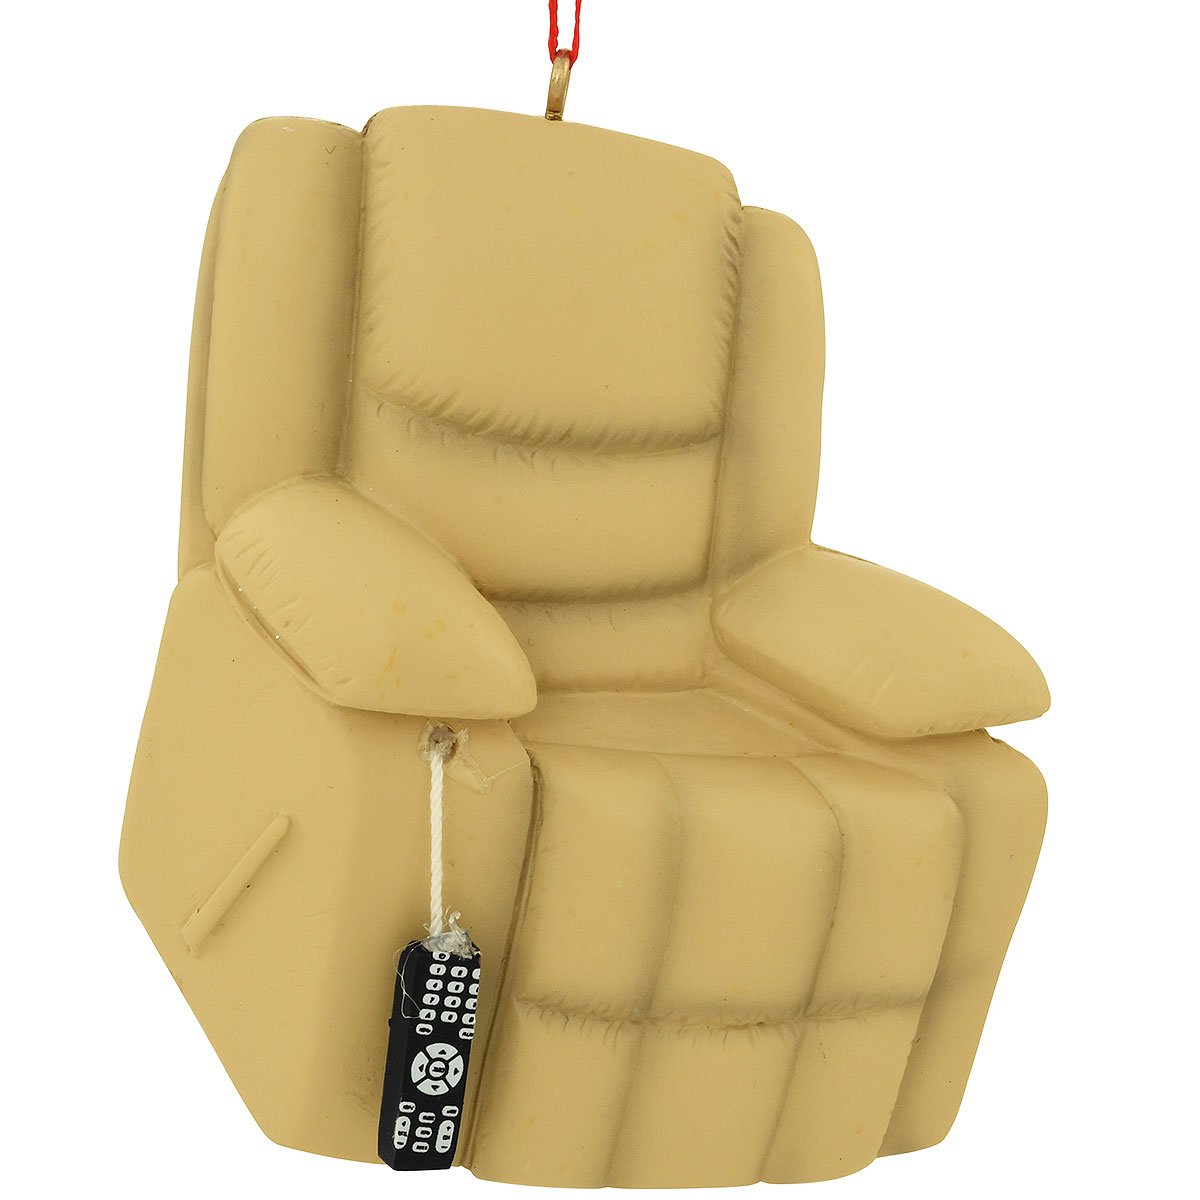 Recliner And Remote Ornament